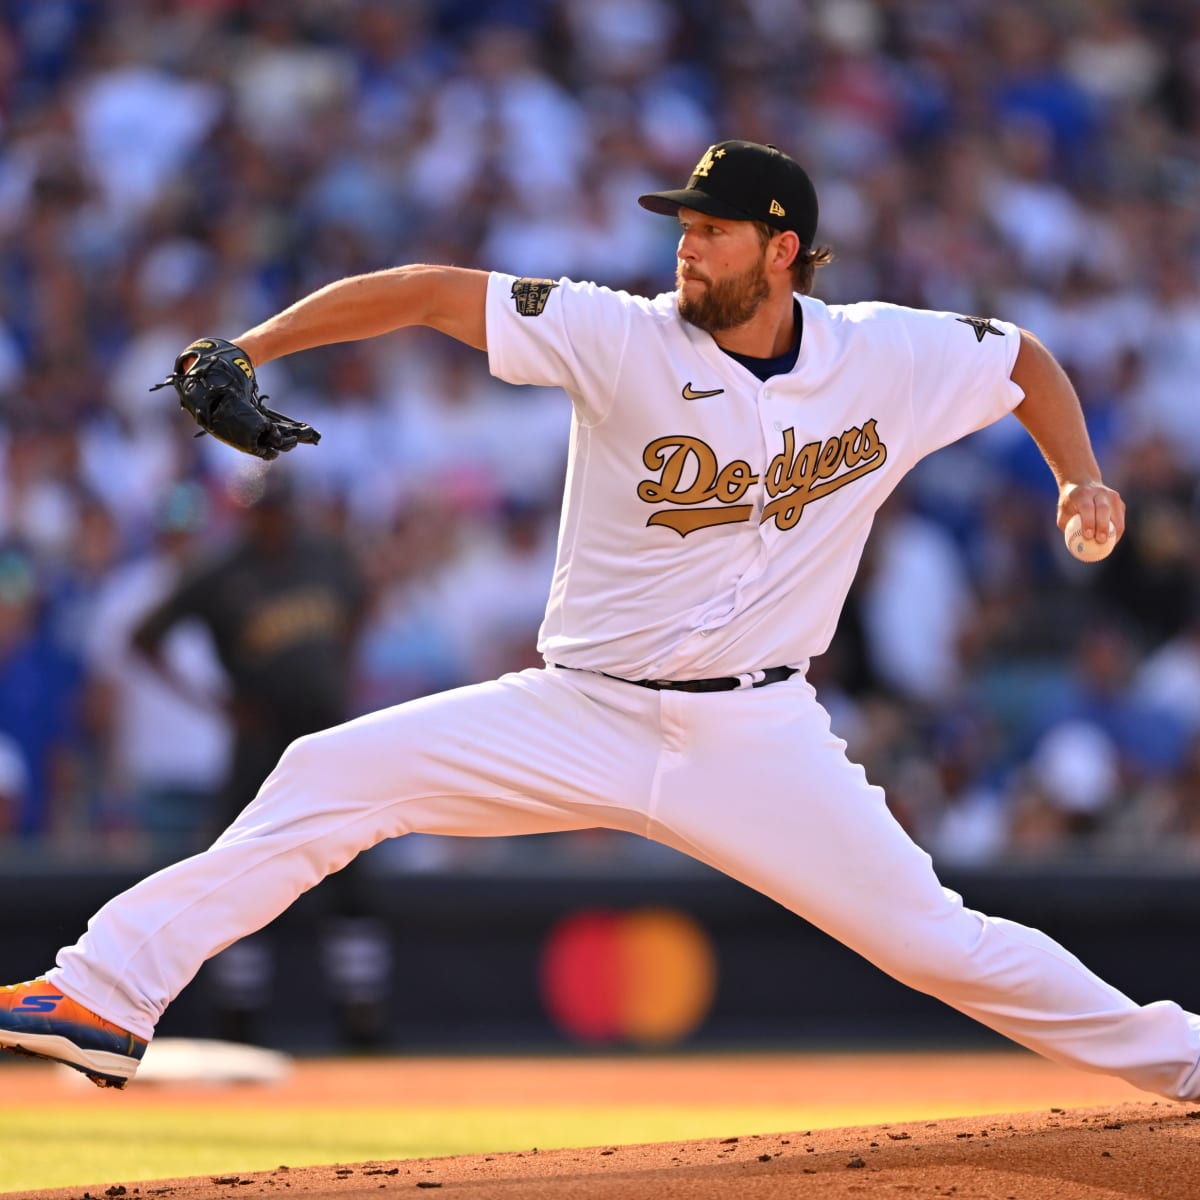 Clayton Kershaw has eventful first inning of the All-Star Game